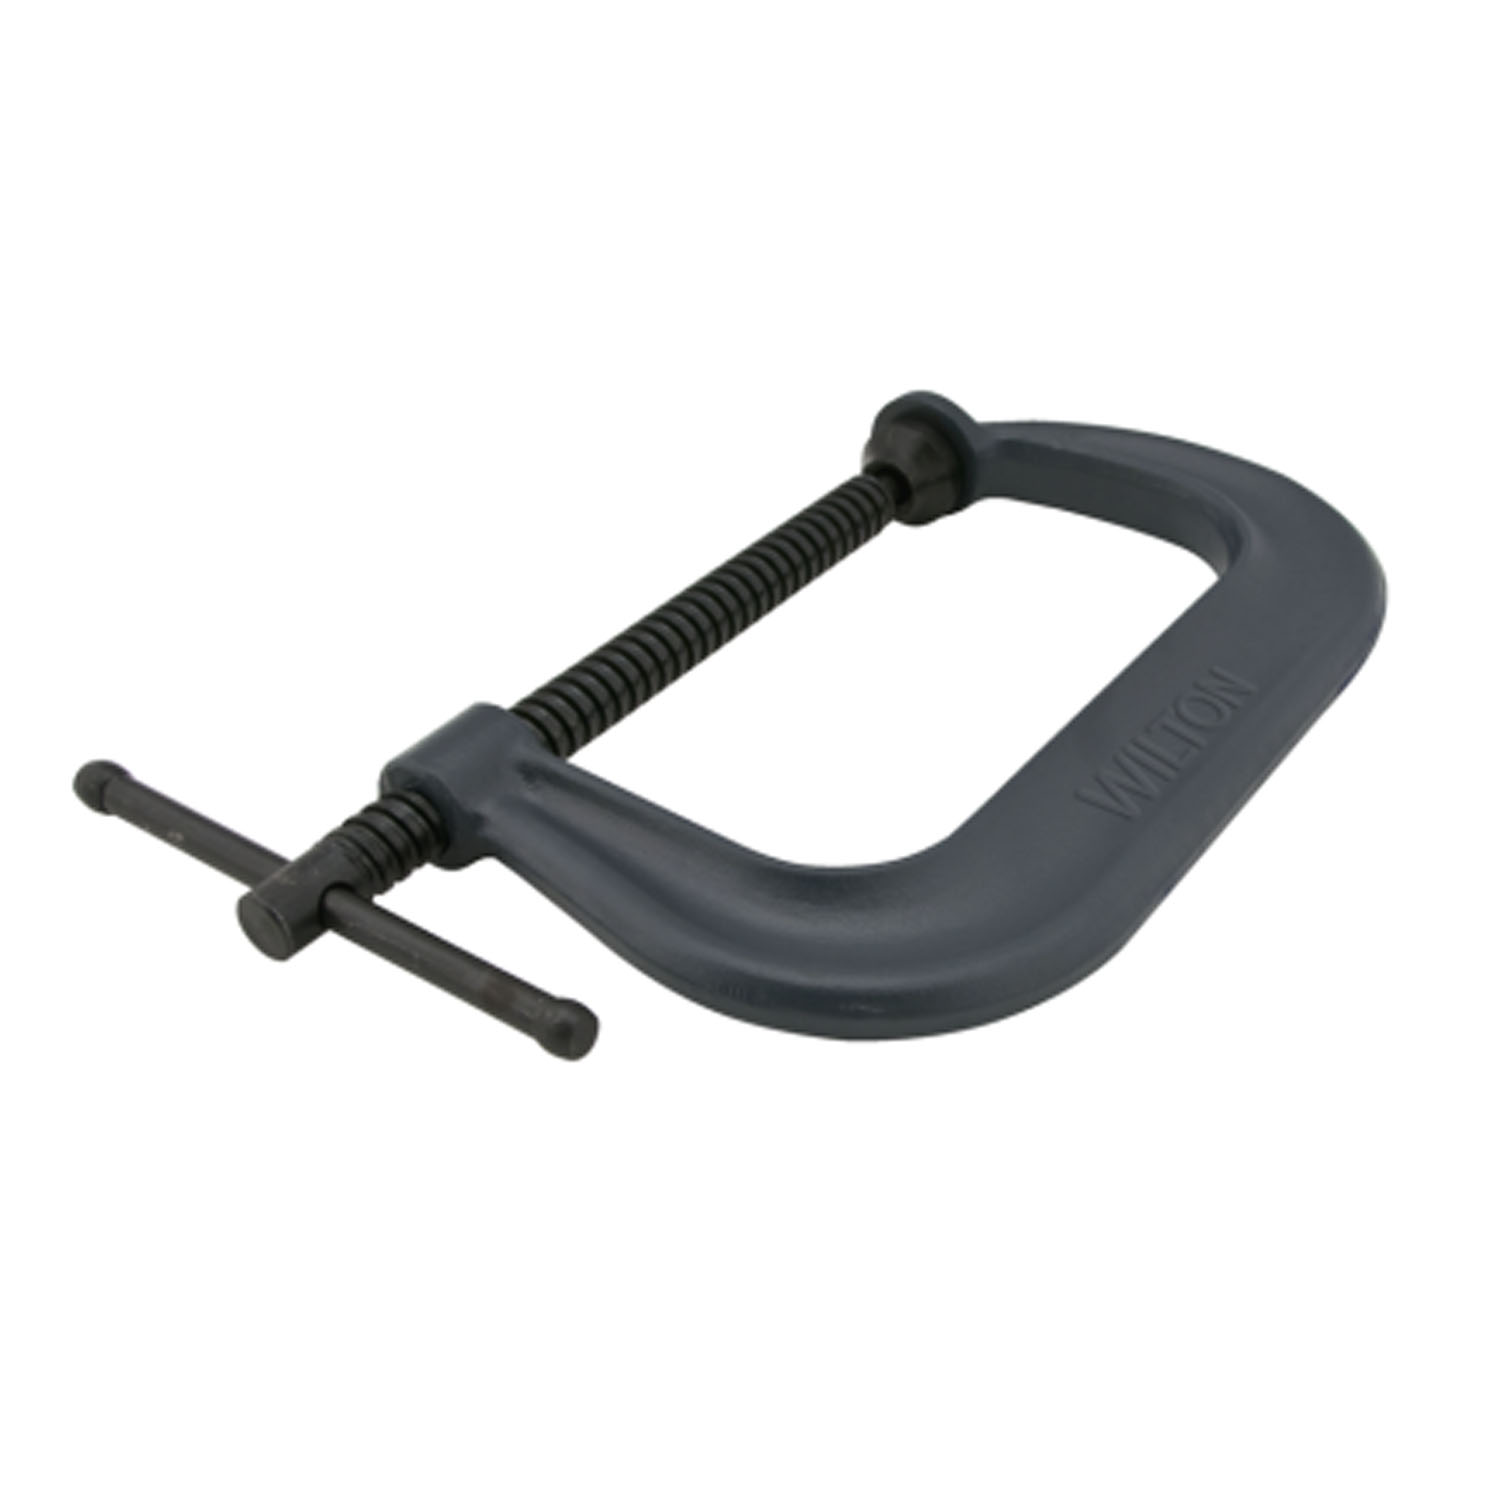 400 SERIES DROP FORGED C-CLAMPS (MULTIPLE SIZES AVAILABLE)